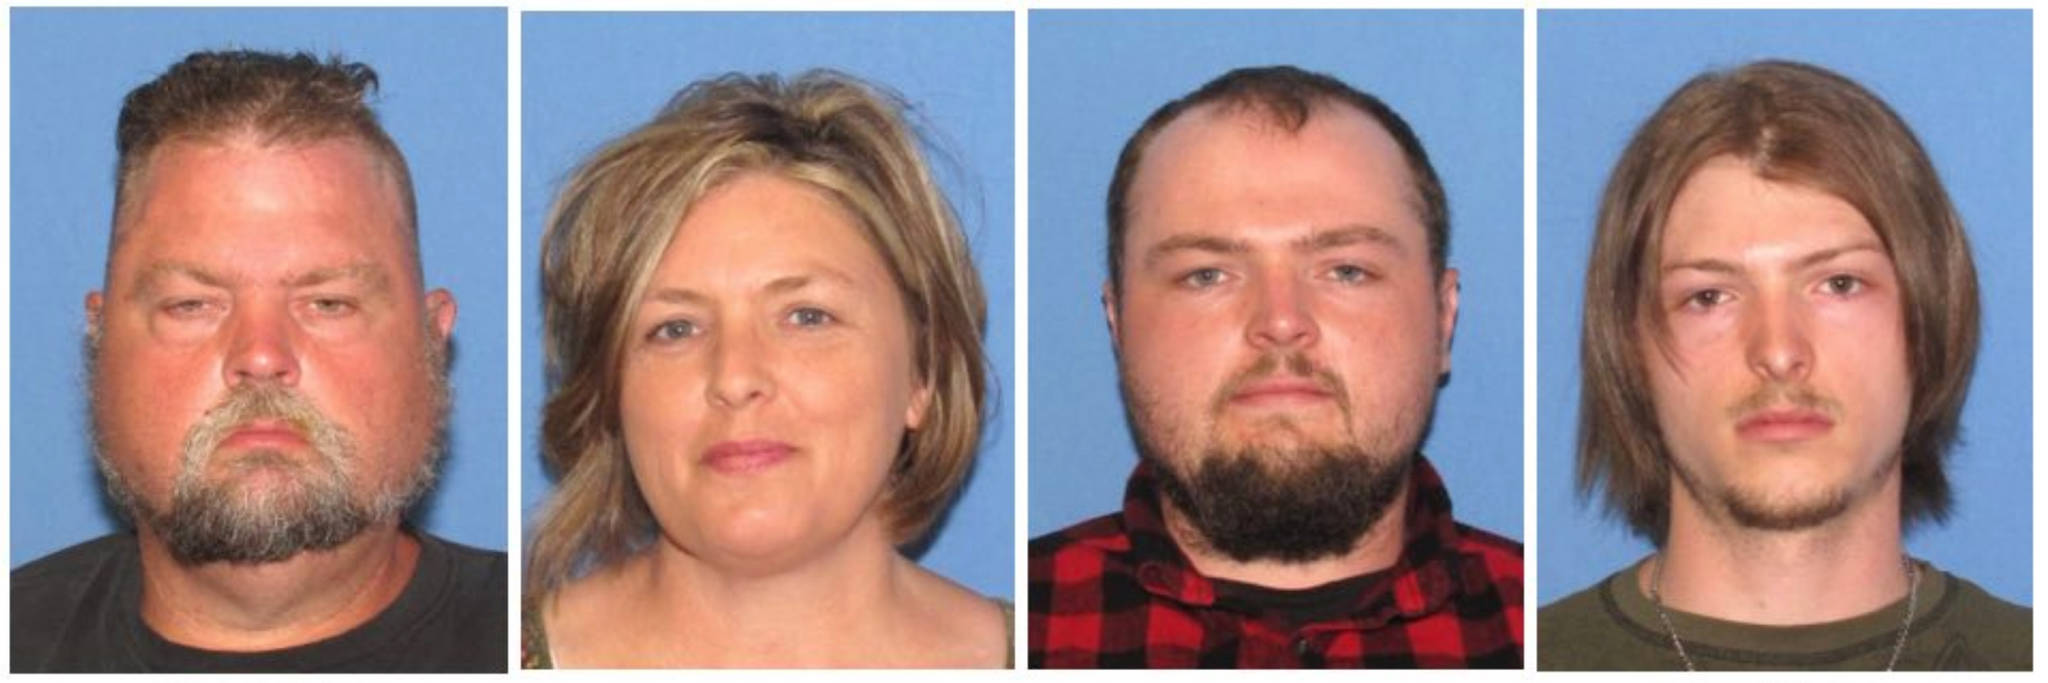 These undated images released by the Ohio Attorney General’s office, show from left, George “Billy” Wagner III, Angela Wagner, George Wagner IV and Edward “Jake” Wagner. Authorities announced Tuesday, Nov. 13, 2018, that the family of four has been arrested in the slayings of eight members of one family in rural Ohio two years ago. (Ohio Attorney General’s office via Associated Press)